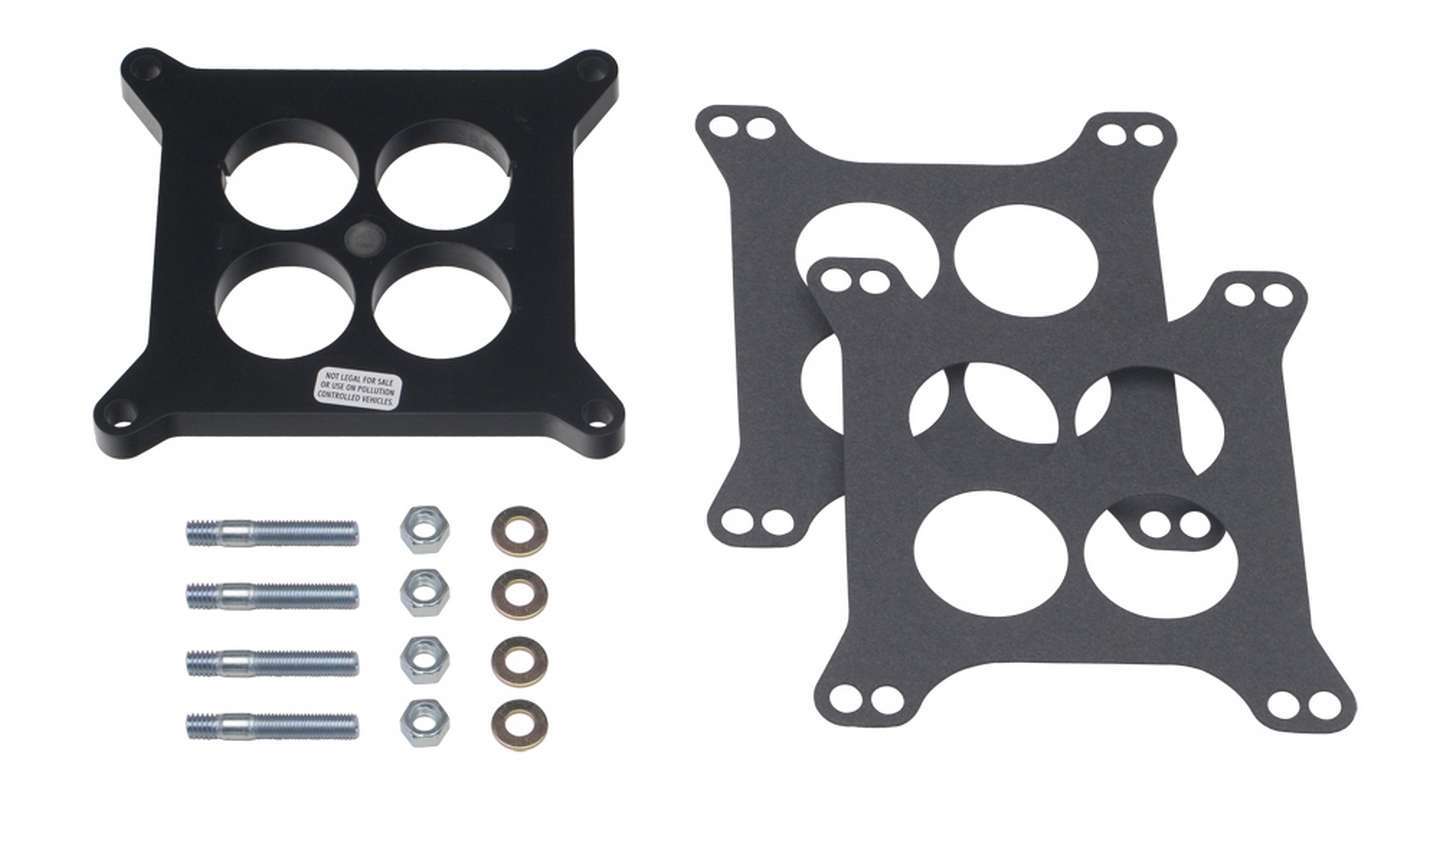 Trans Dapt 2370 Carburetor Spacer, 1/2 in Thick, 4 Hole, Square Bore, Gaskets / Hardware Included, Phenolic, Black, Each